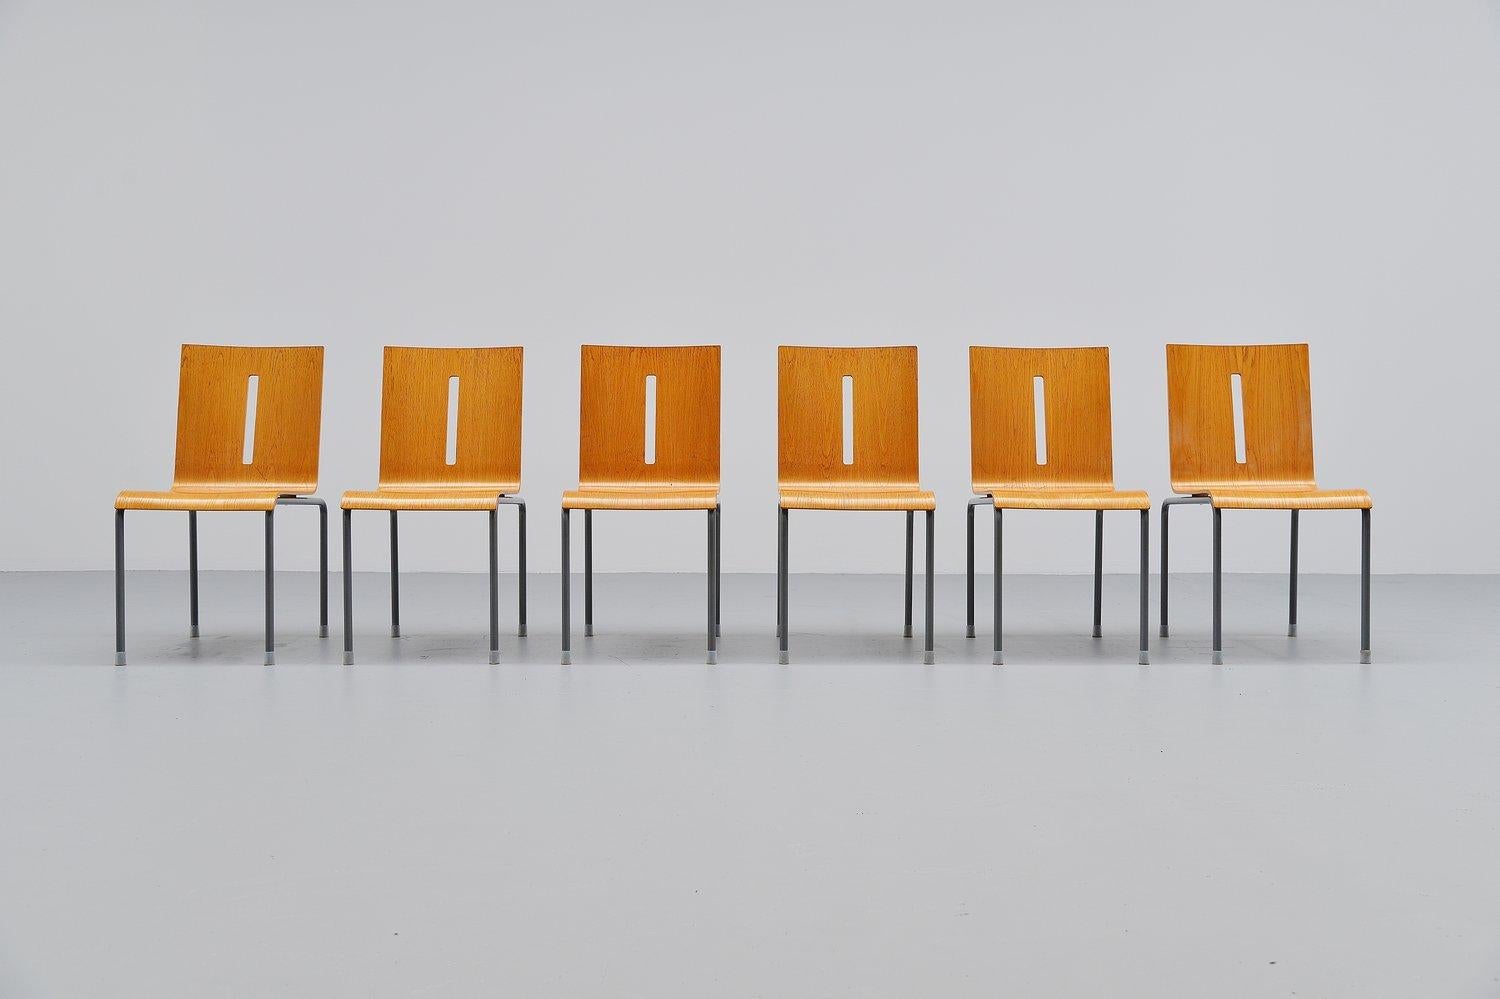 Very nice set of 6 Hopper chairs designed by one of the most important Dutch designers of the 21st century, Richard Hutten. These chairs were made in his own atelier in very small production numbers. The chairs have a grey lacquered tubular metal